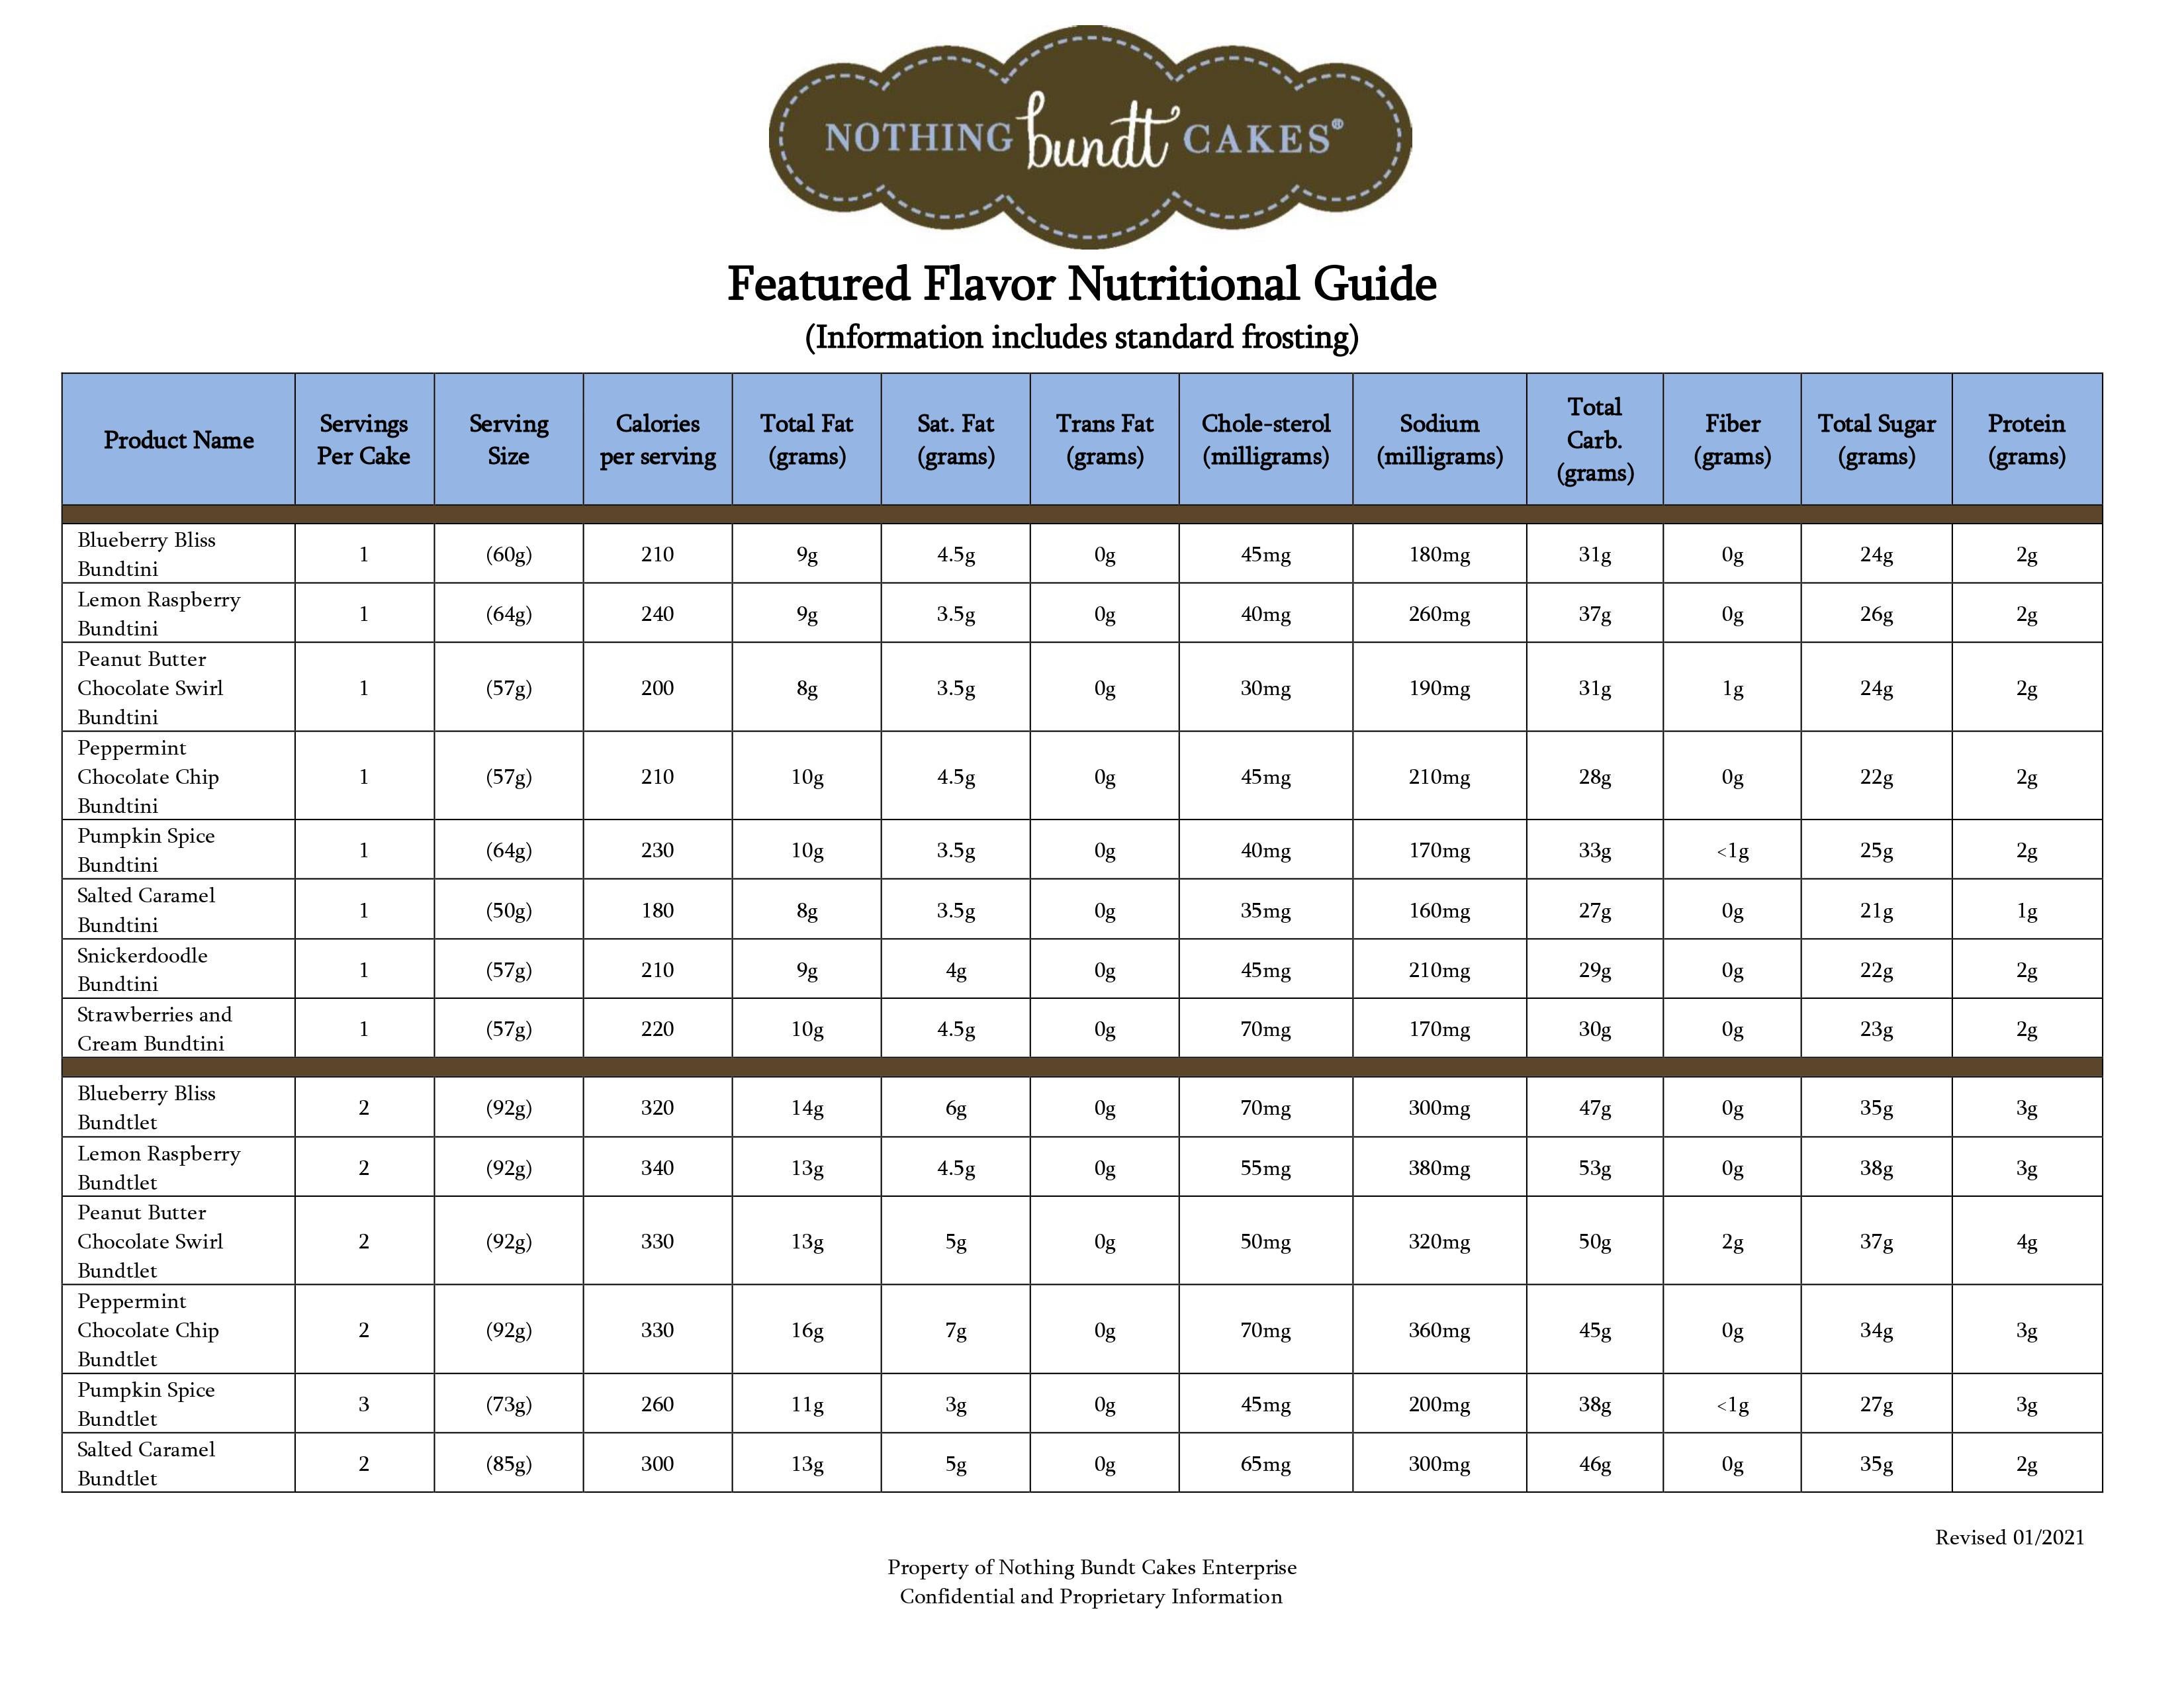 Featured Flavor Nutritional Guide Pg 1